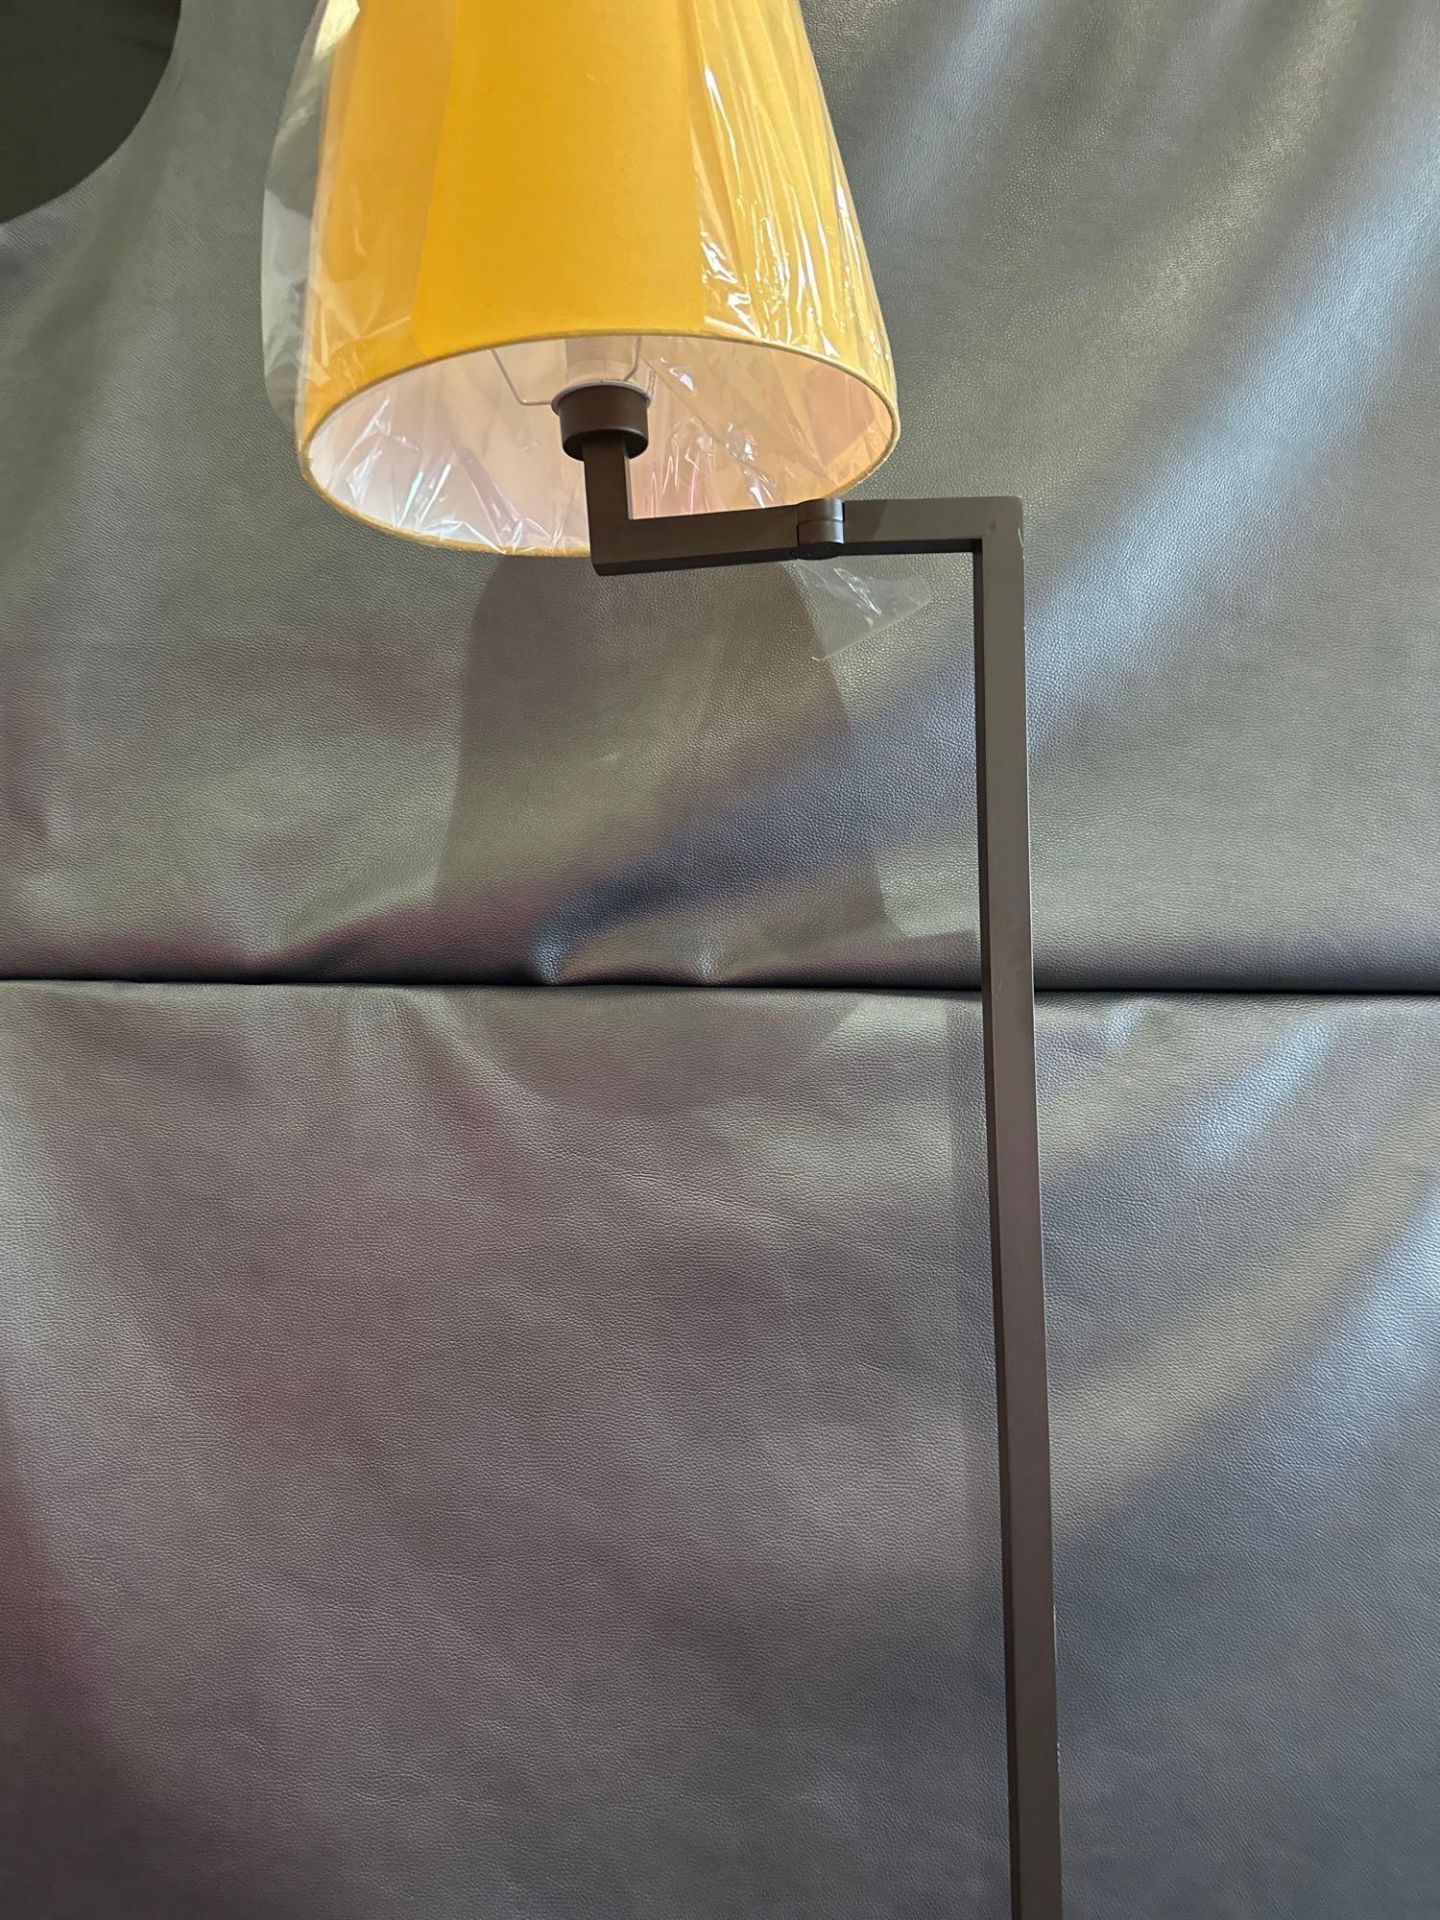 Sifra Floor Lamps Model LMS 600 ENG Metal Base With Single Arm Single Bulb Complete With New Shade - Image 3 of 4